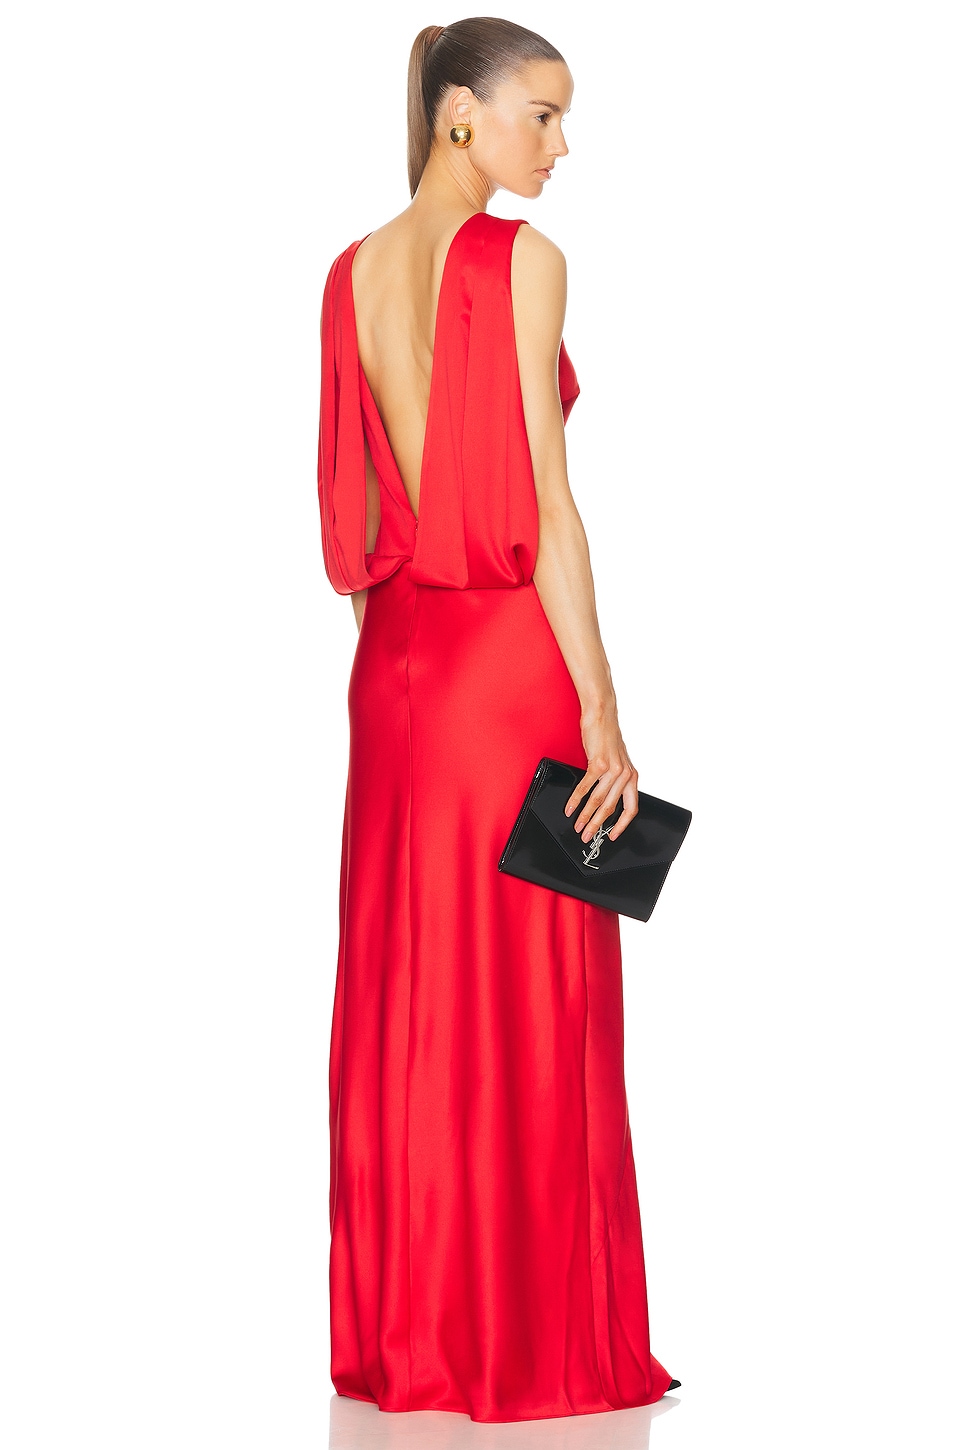 by Marianna Thylane Gown in Red